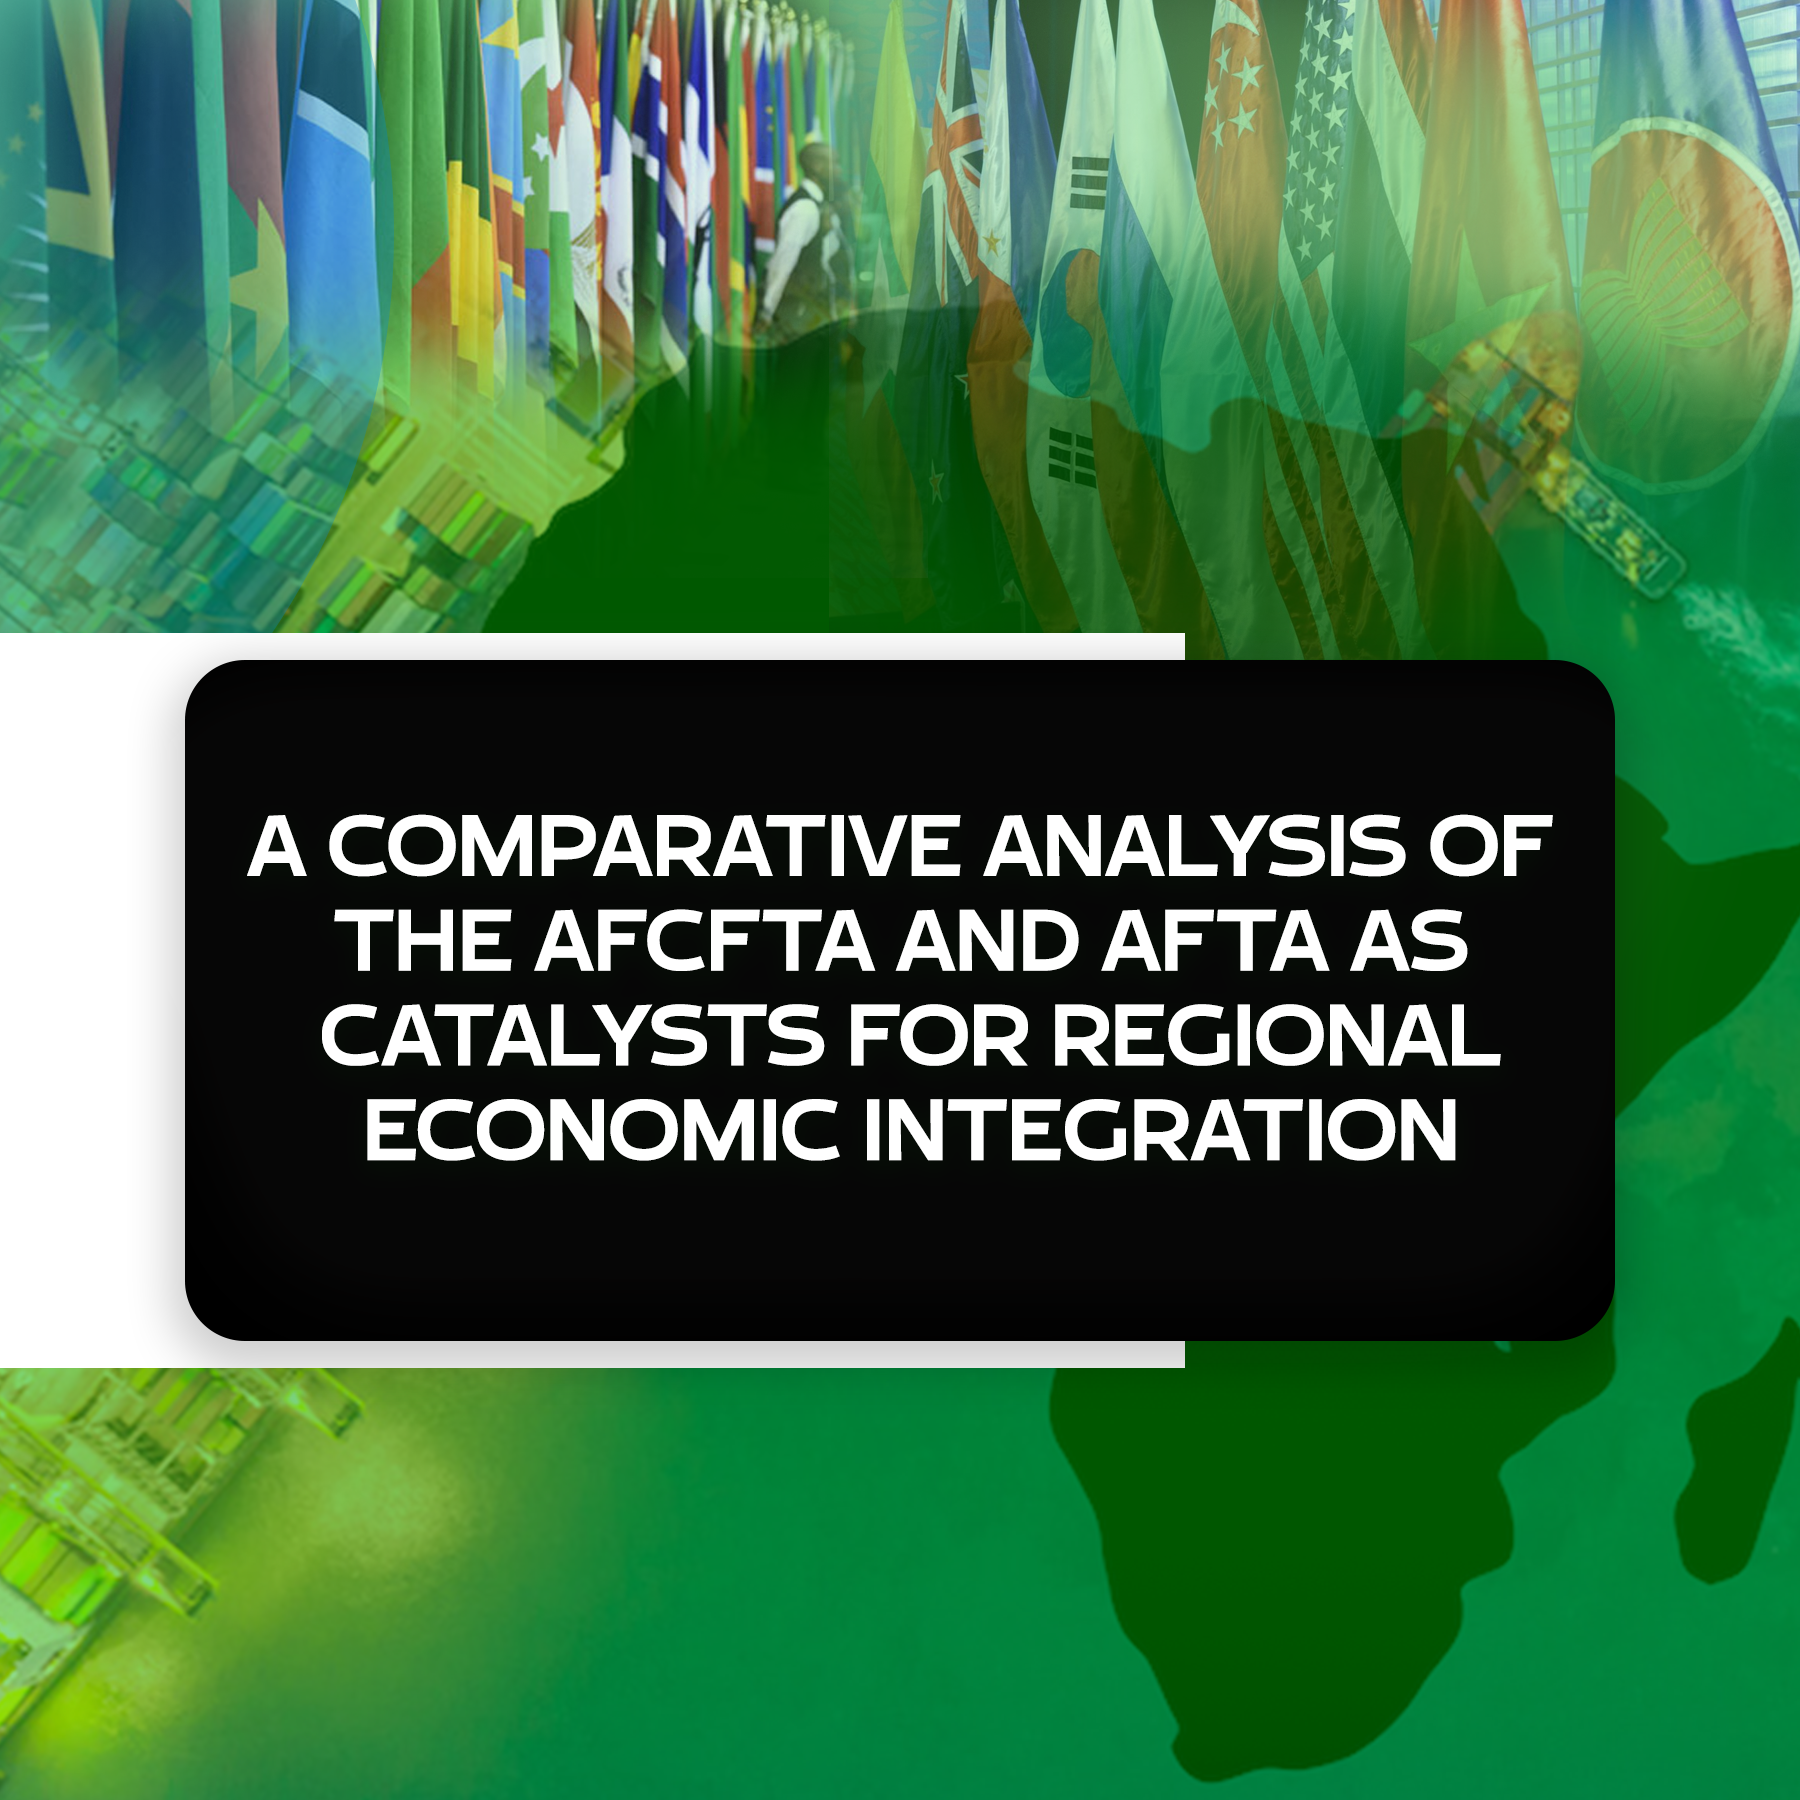 A Comparative Analysis of the AfCFTA and AFTA as catalysts for Regional Economic Integration